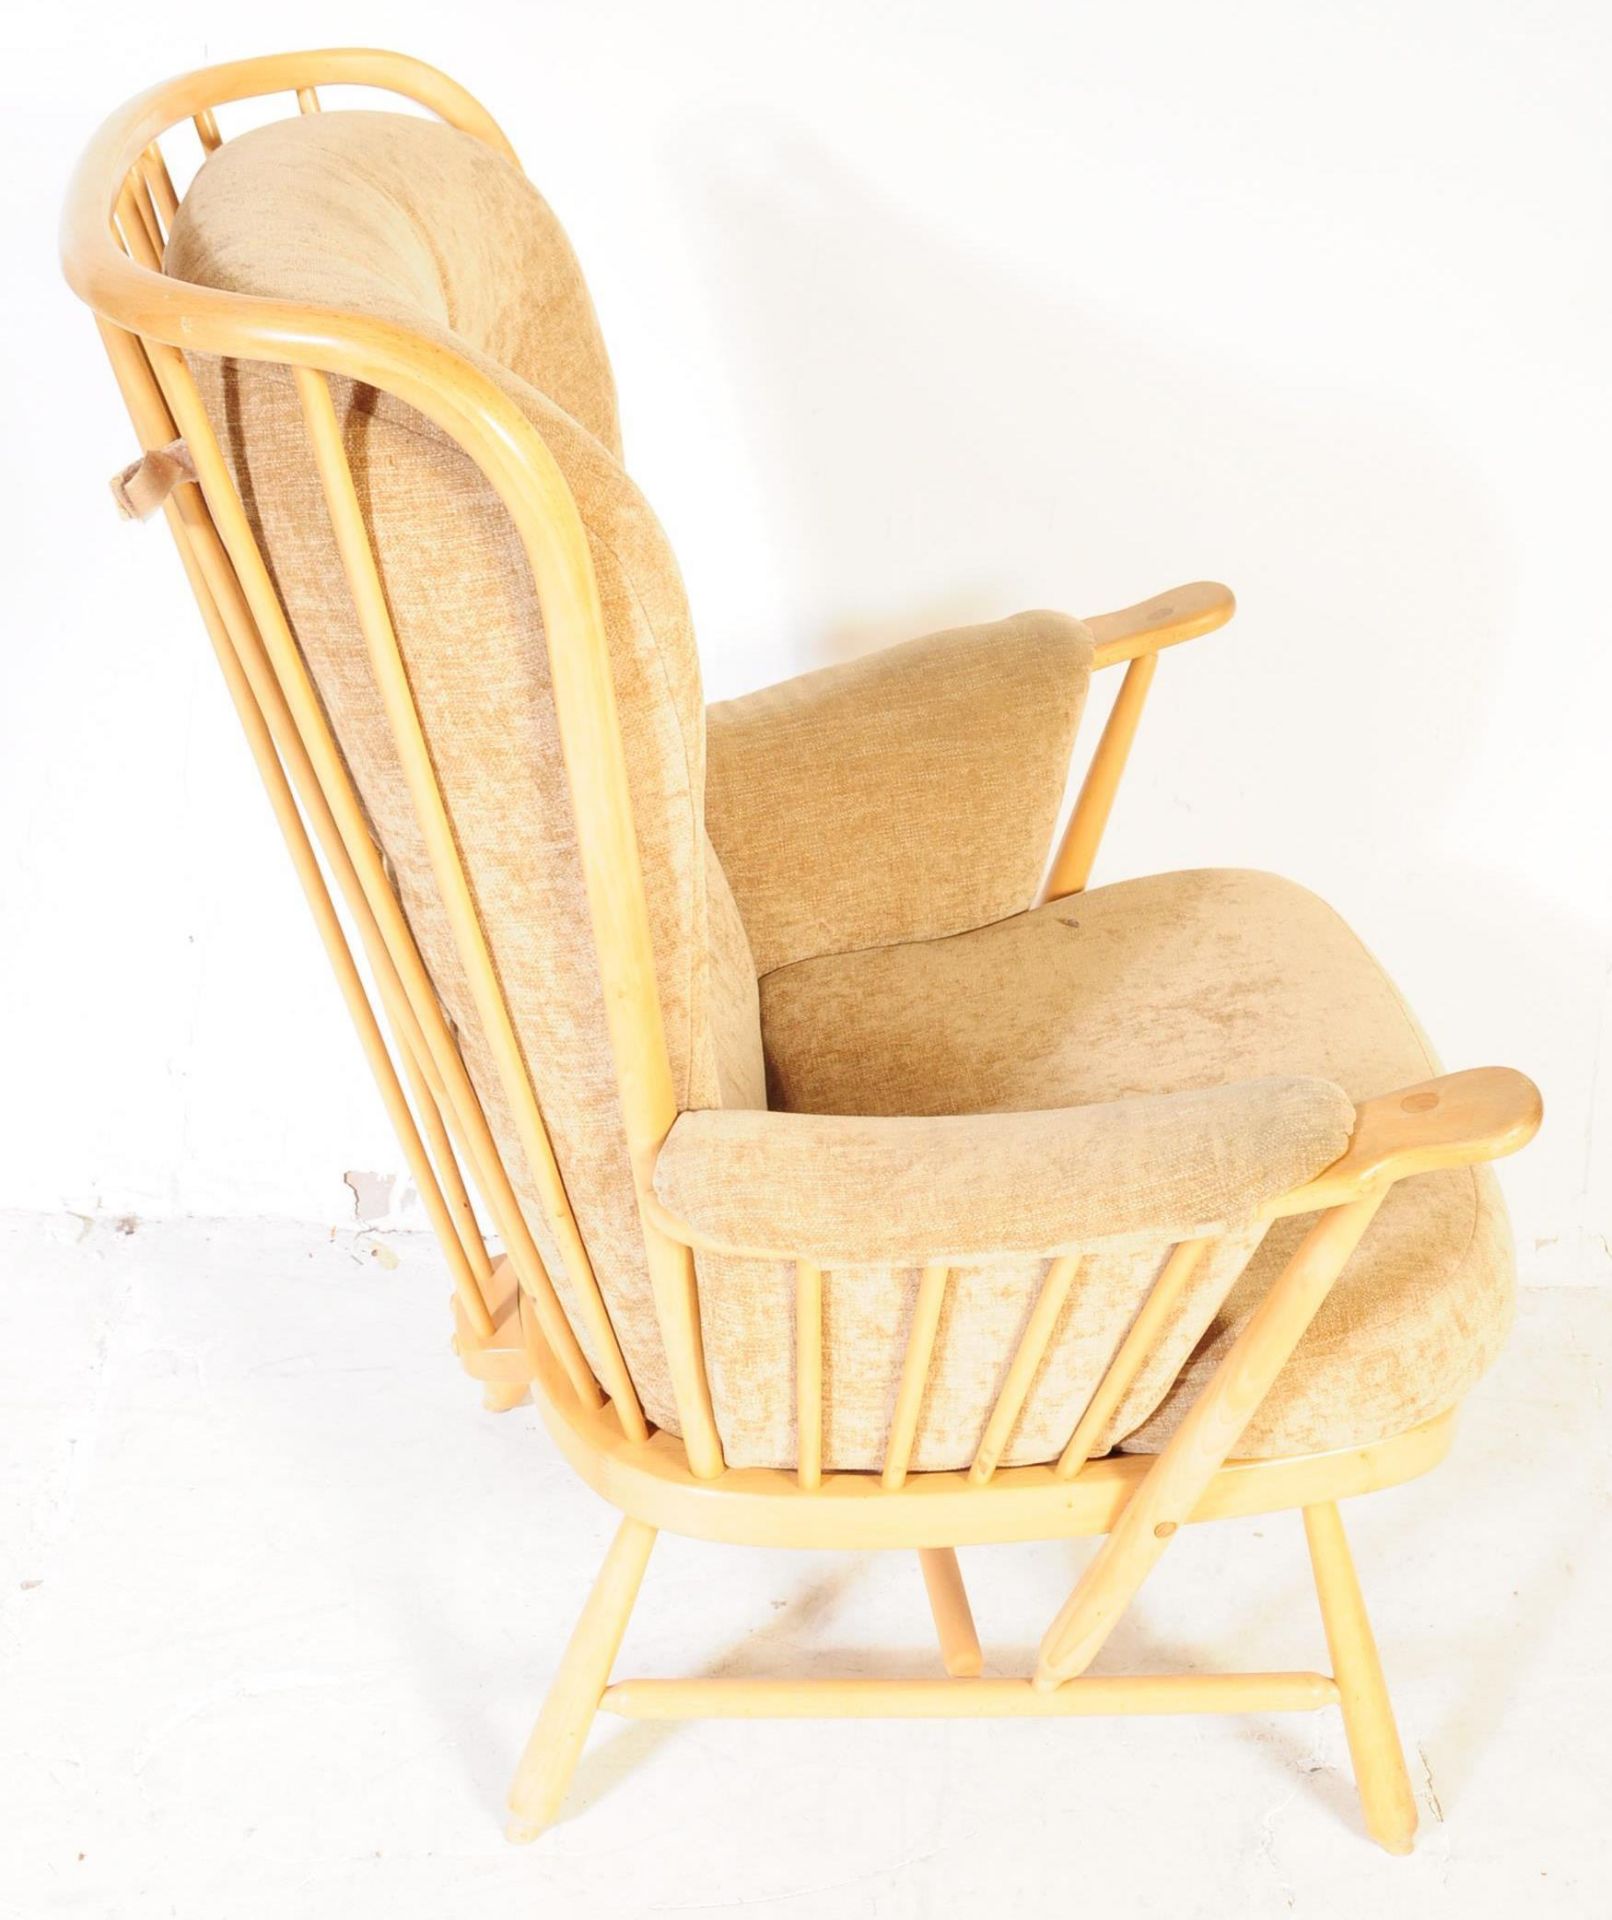 VINTAGE MID 20TH CENTURY ERCOL CONSERVATORY ARMCHAIR - Image 4 of 6